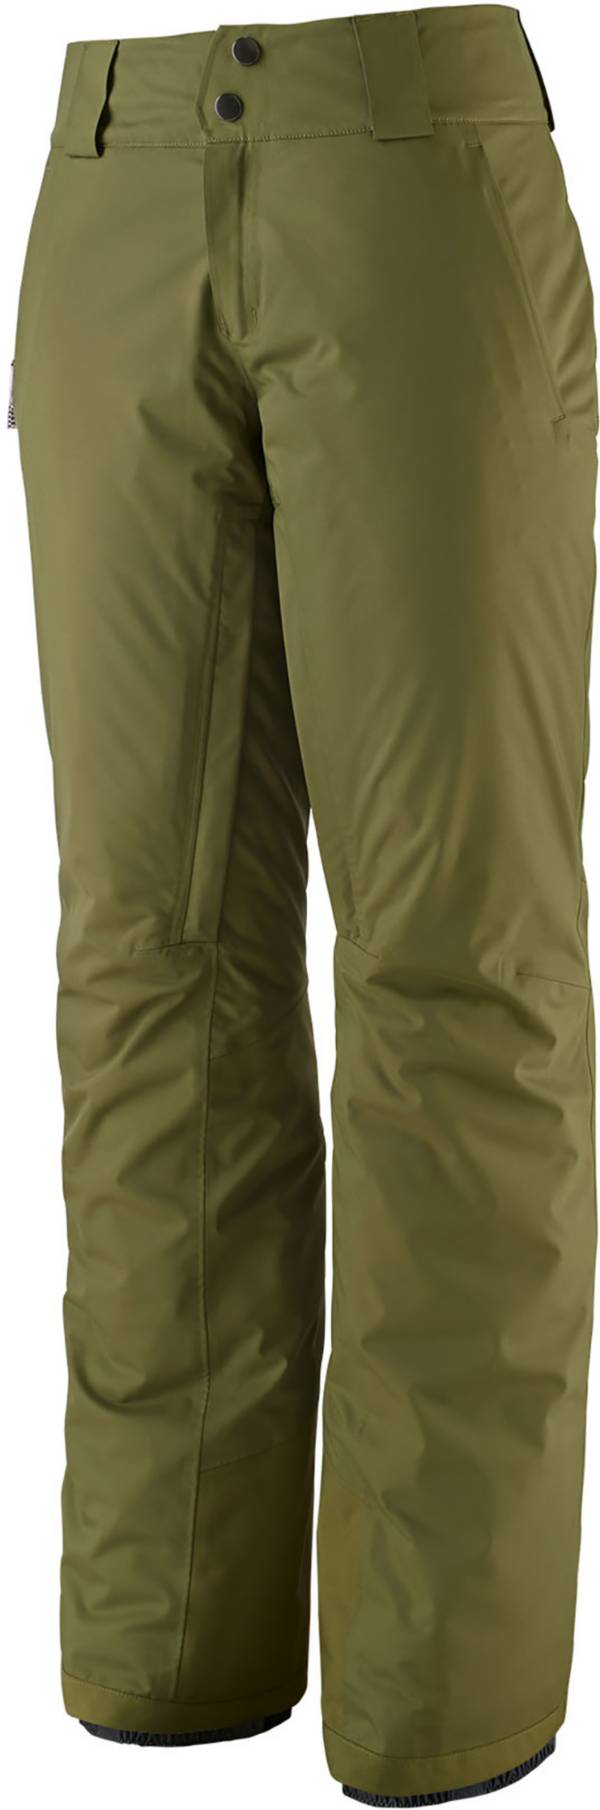 Patagonia Women's Insulated Snowbelle Pants product image